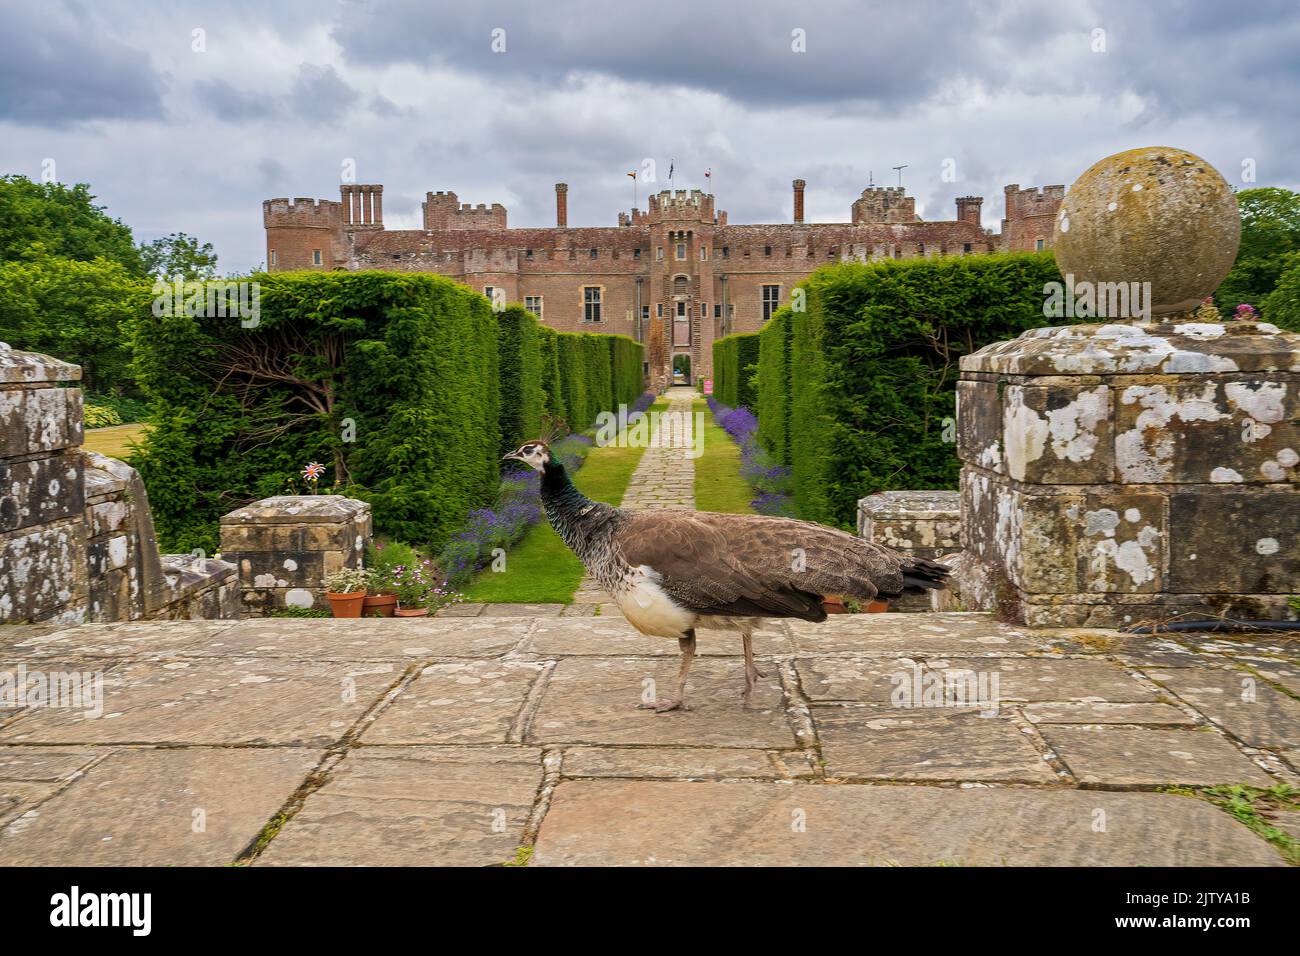 A Peahen roams around the grounds of Herstmonceux Castle, Herstmonceux, East Sussex, England, Uk Stock Photo